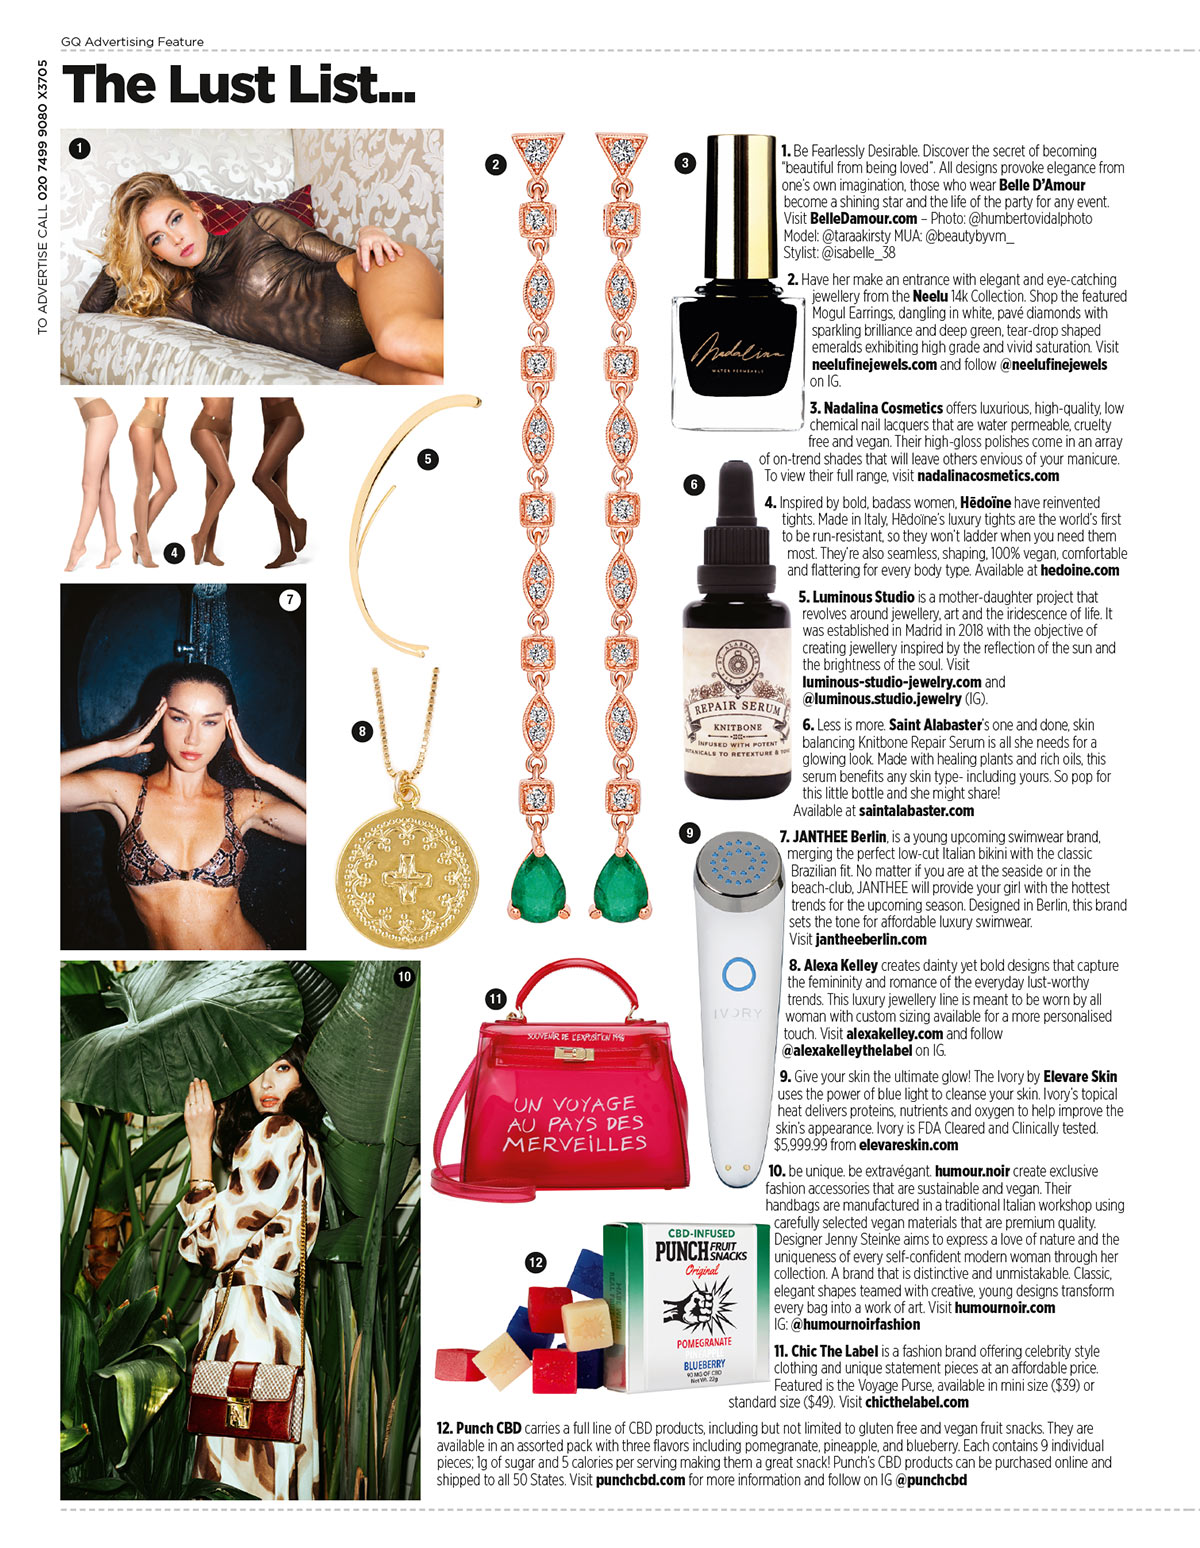 The Lust List... feature in GQ magazine that highlights the Ivory device from Elevare Skin